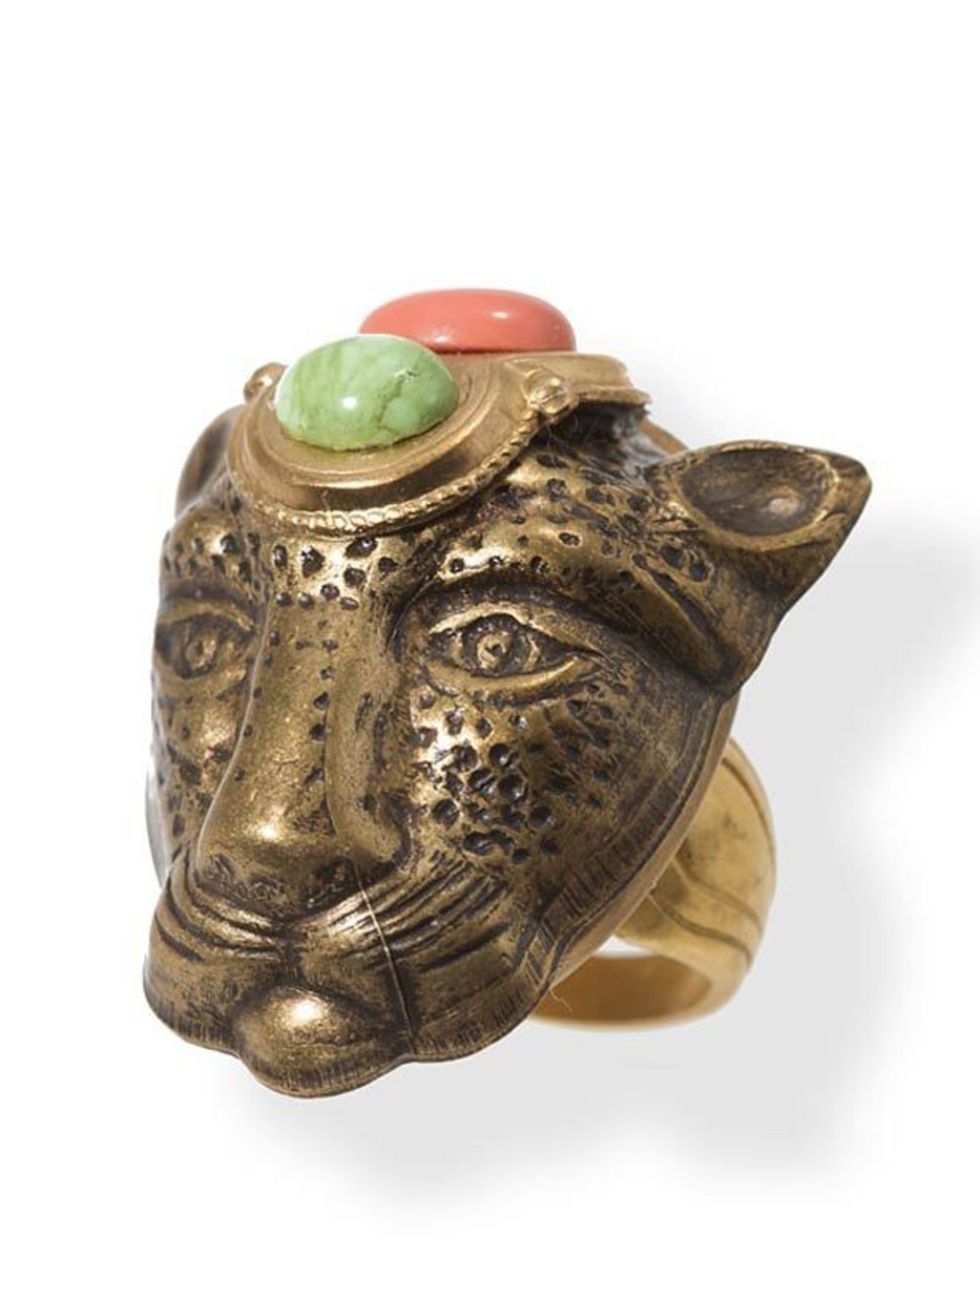 <p>Jaguar head cocktail ring, £175, by Patrice at <a href="http://www.frenchsdairy.com/designers/patrice/rings/handmade-patrice-lion-head-ring.html">French's Dairy</a> </p>